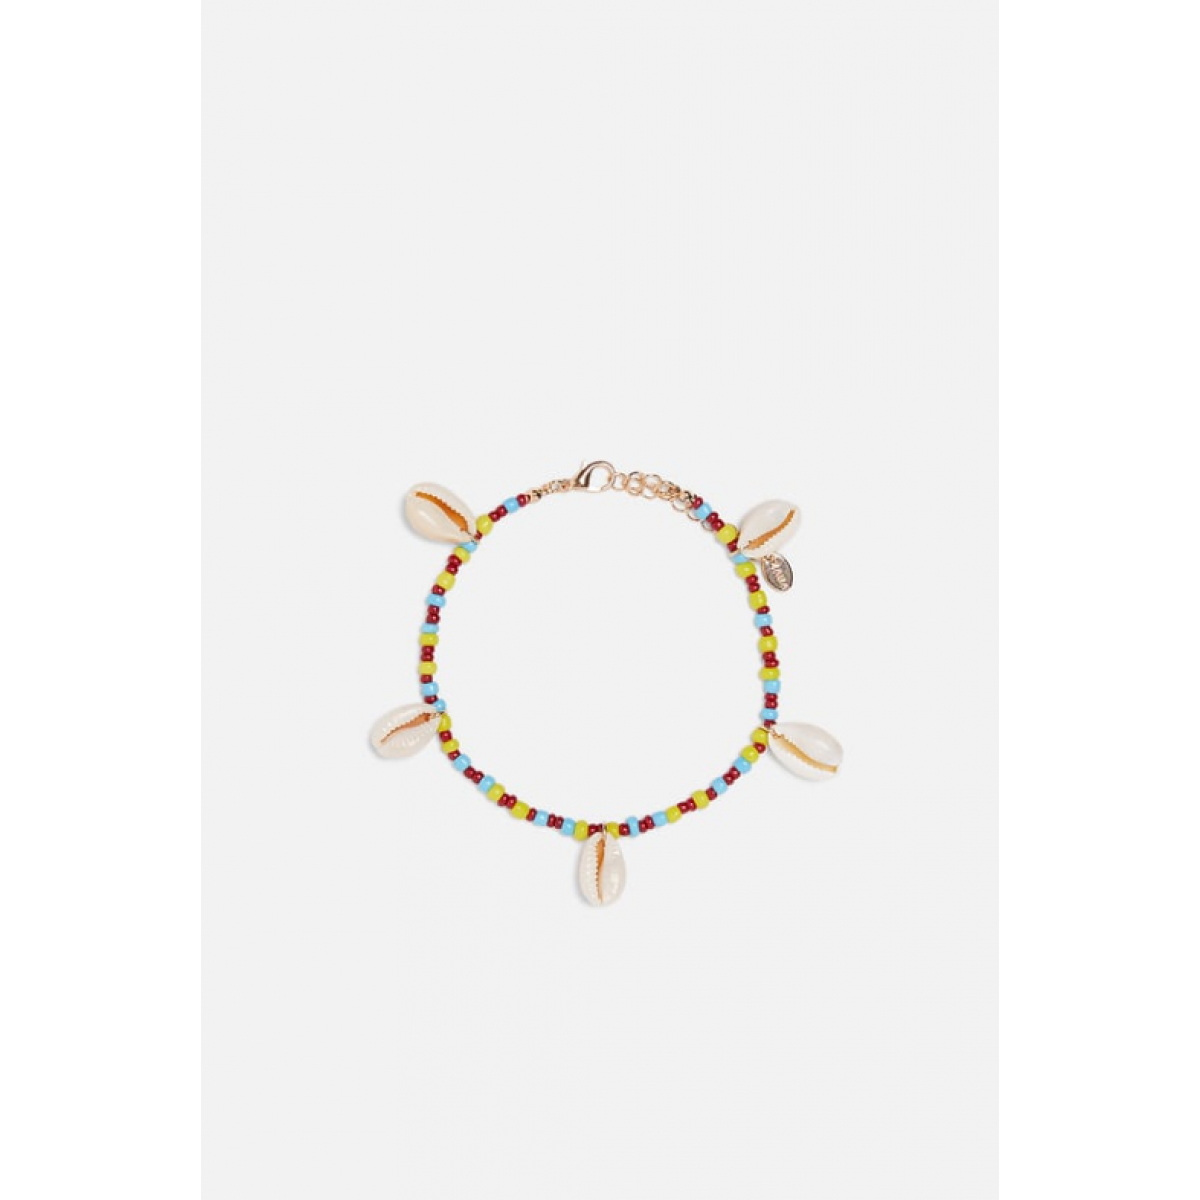 Zara Pack Of Seashell Necklace And Anklet